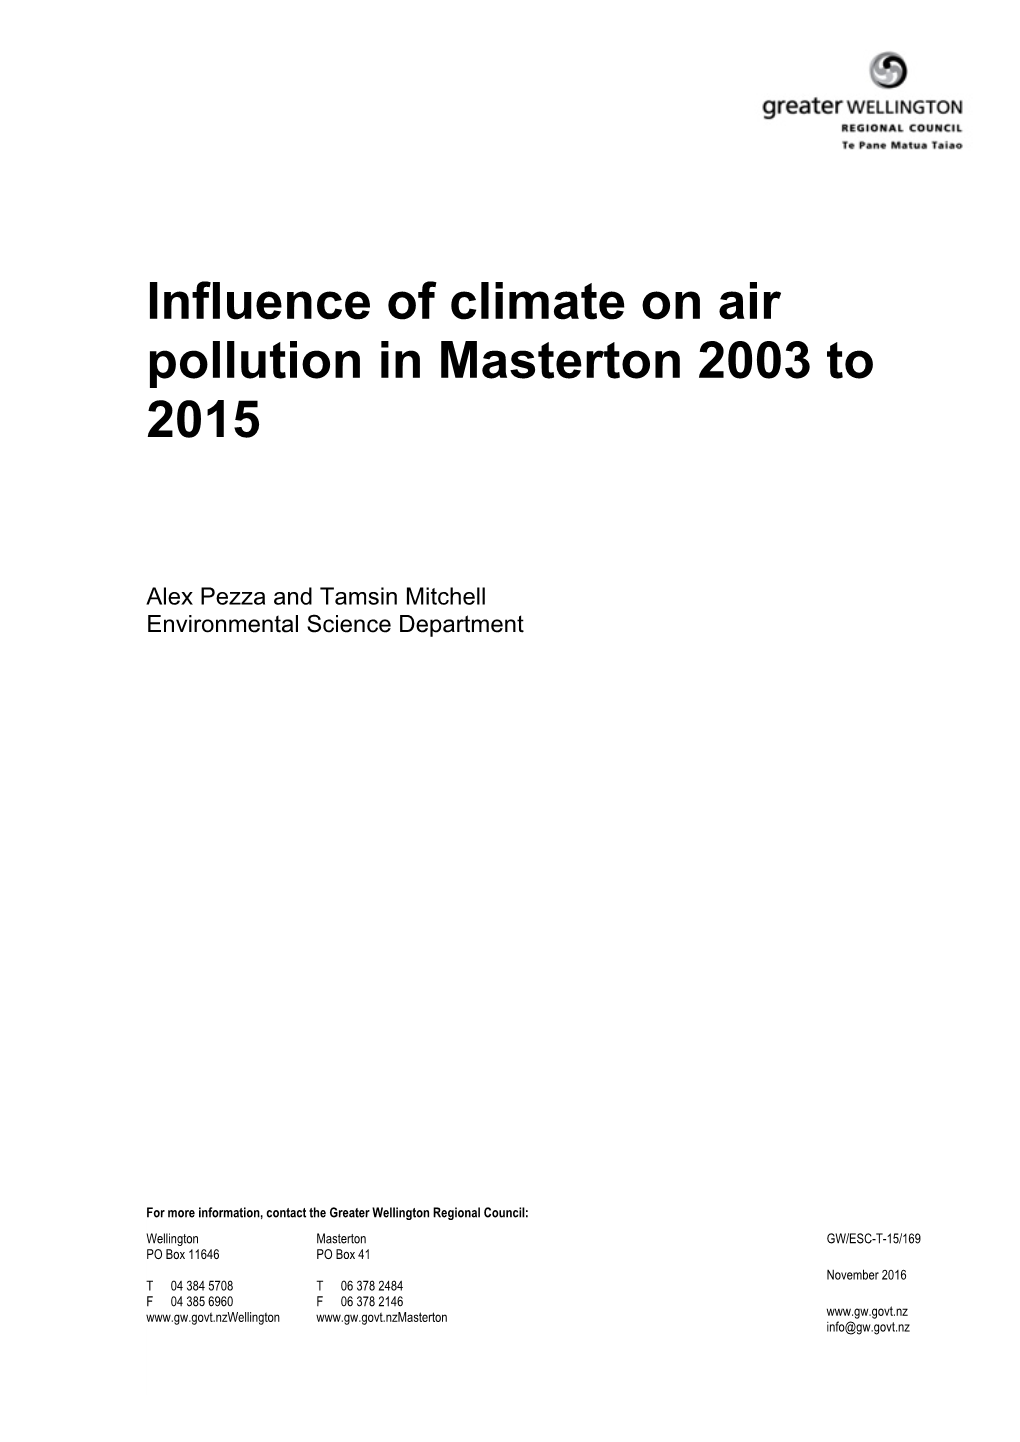 Influence of Climate on Air Pollution in Masterton 2003 to 2015